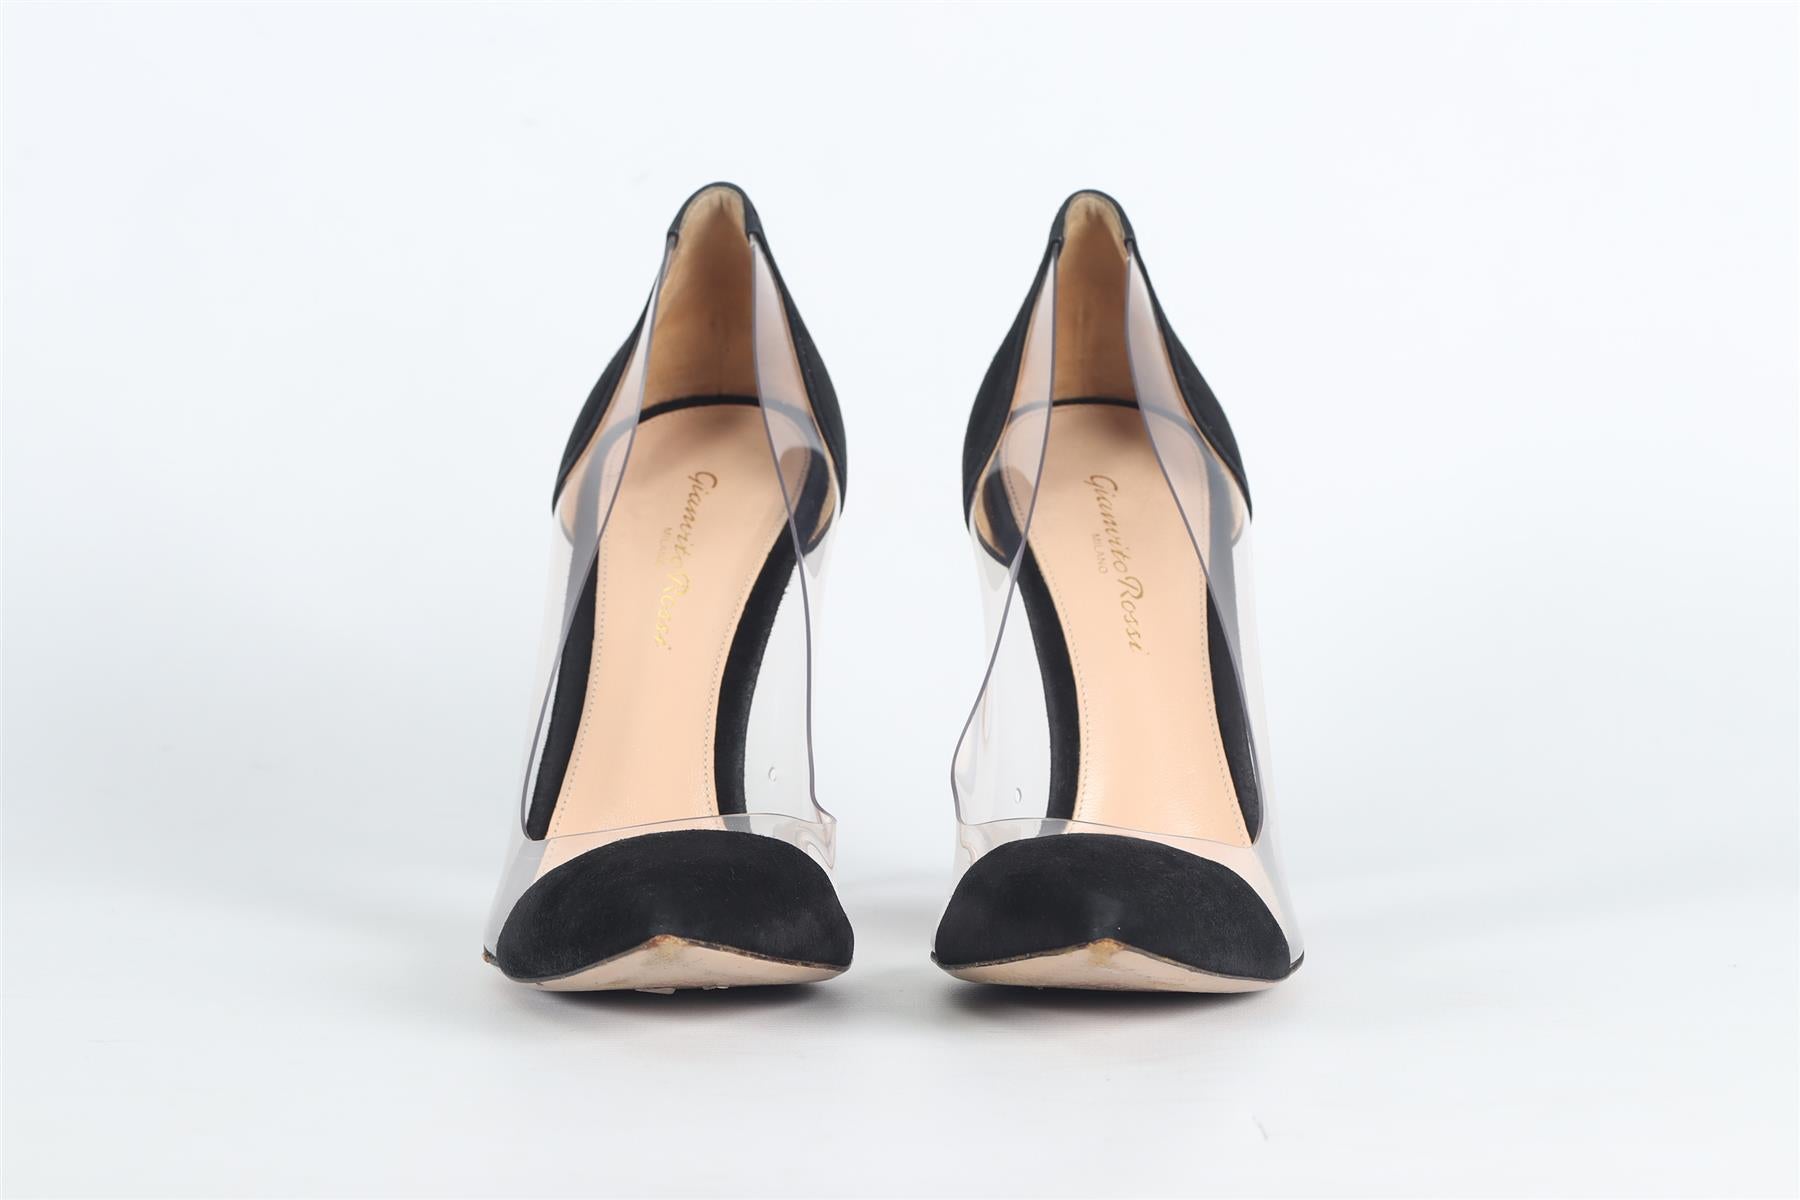 GIANVITO ROSSI PVC AND SUEDE PUMPS EU 39.5 UK 6.5 US 9.5